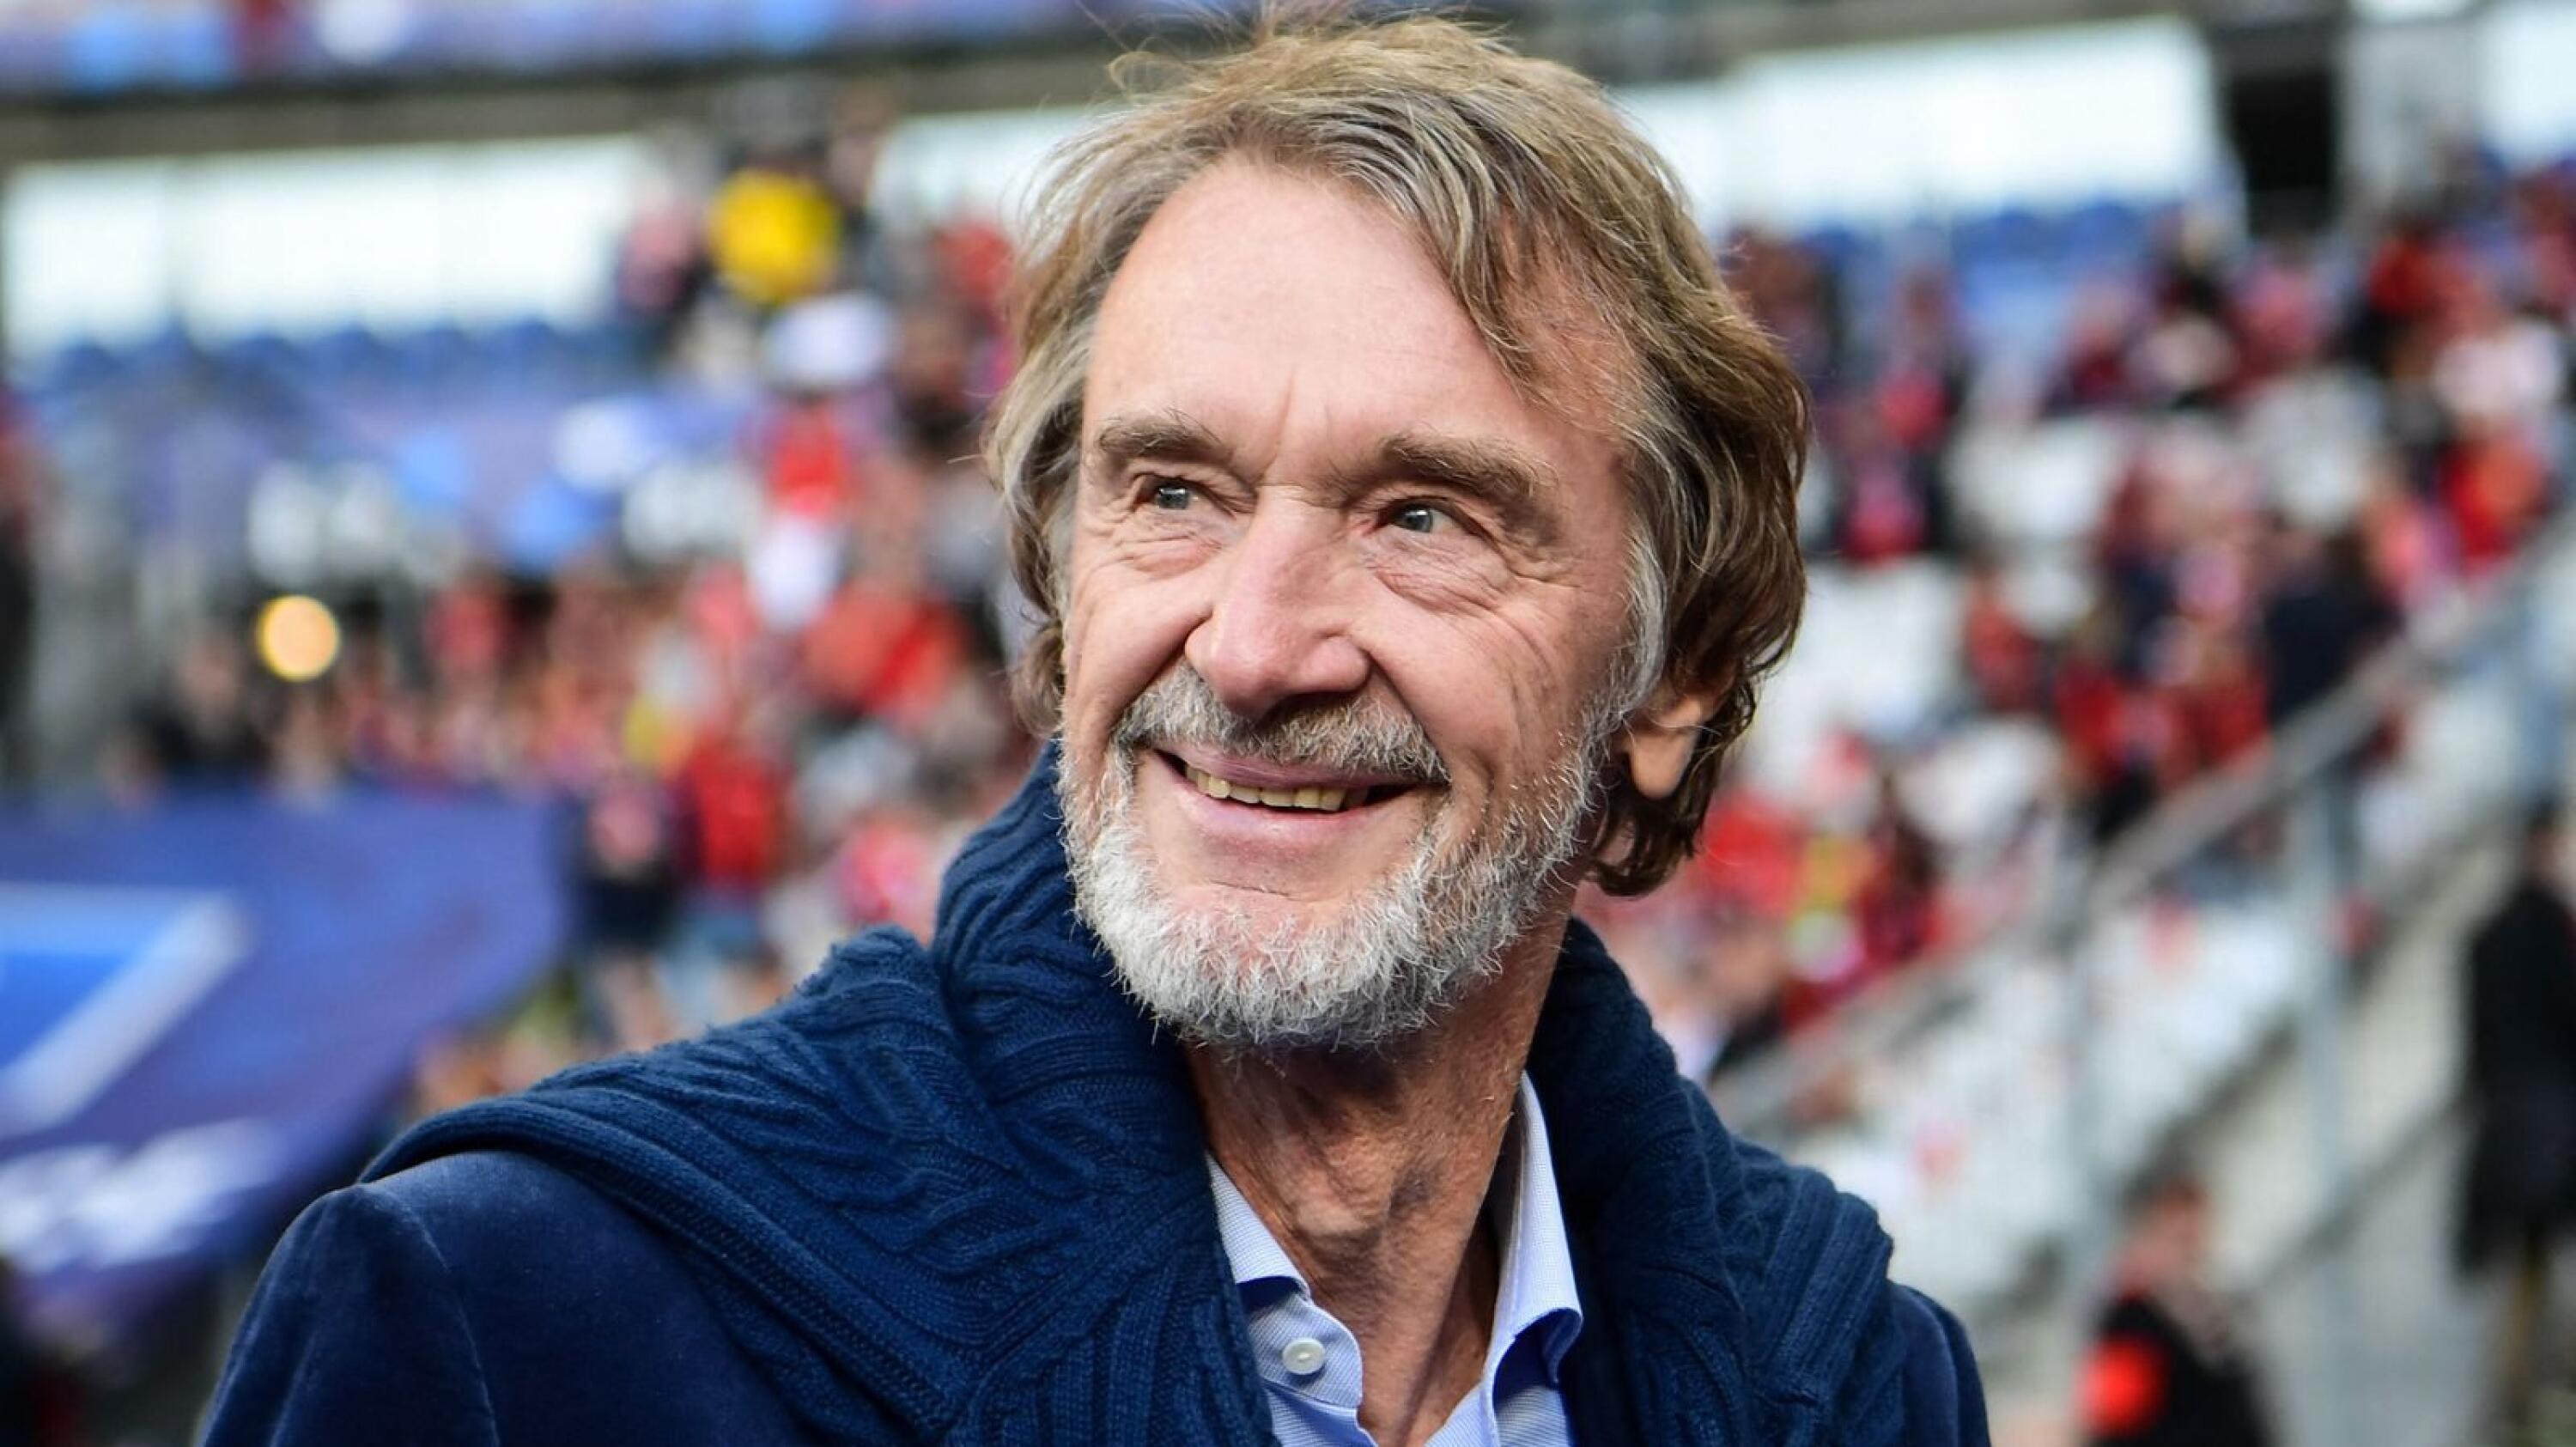 British INEOS Group chairman and OGC Nice's owner Jim Ratcliffe looks on before last season’s French Cup final